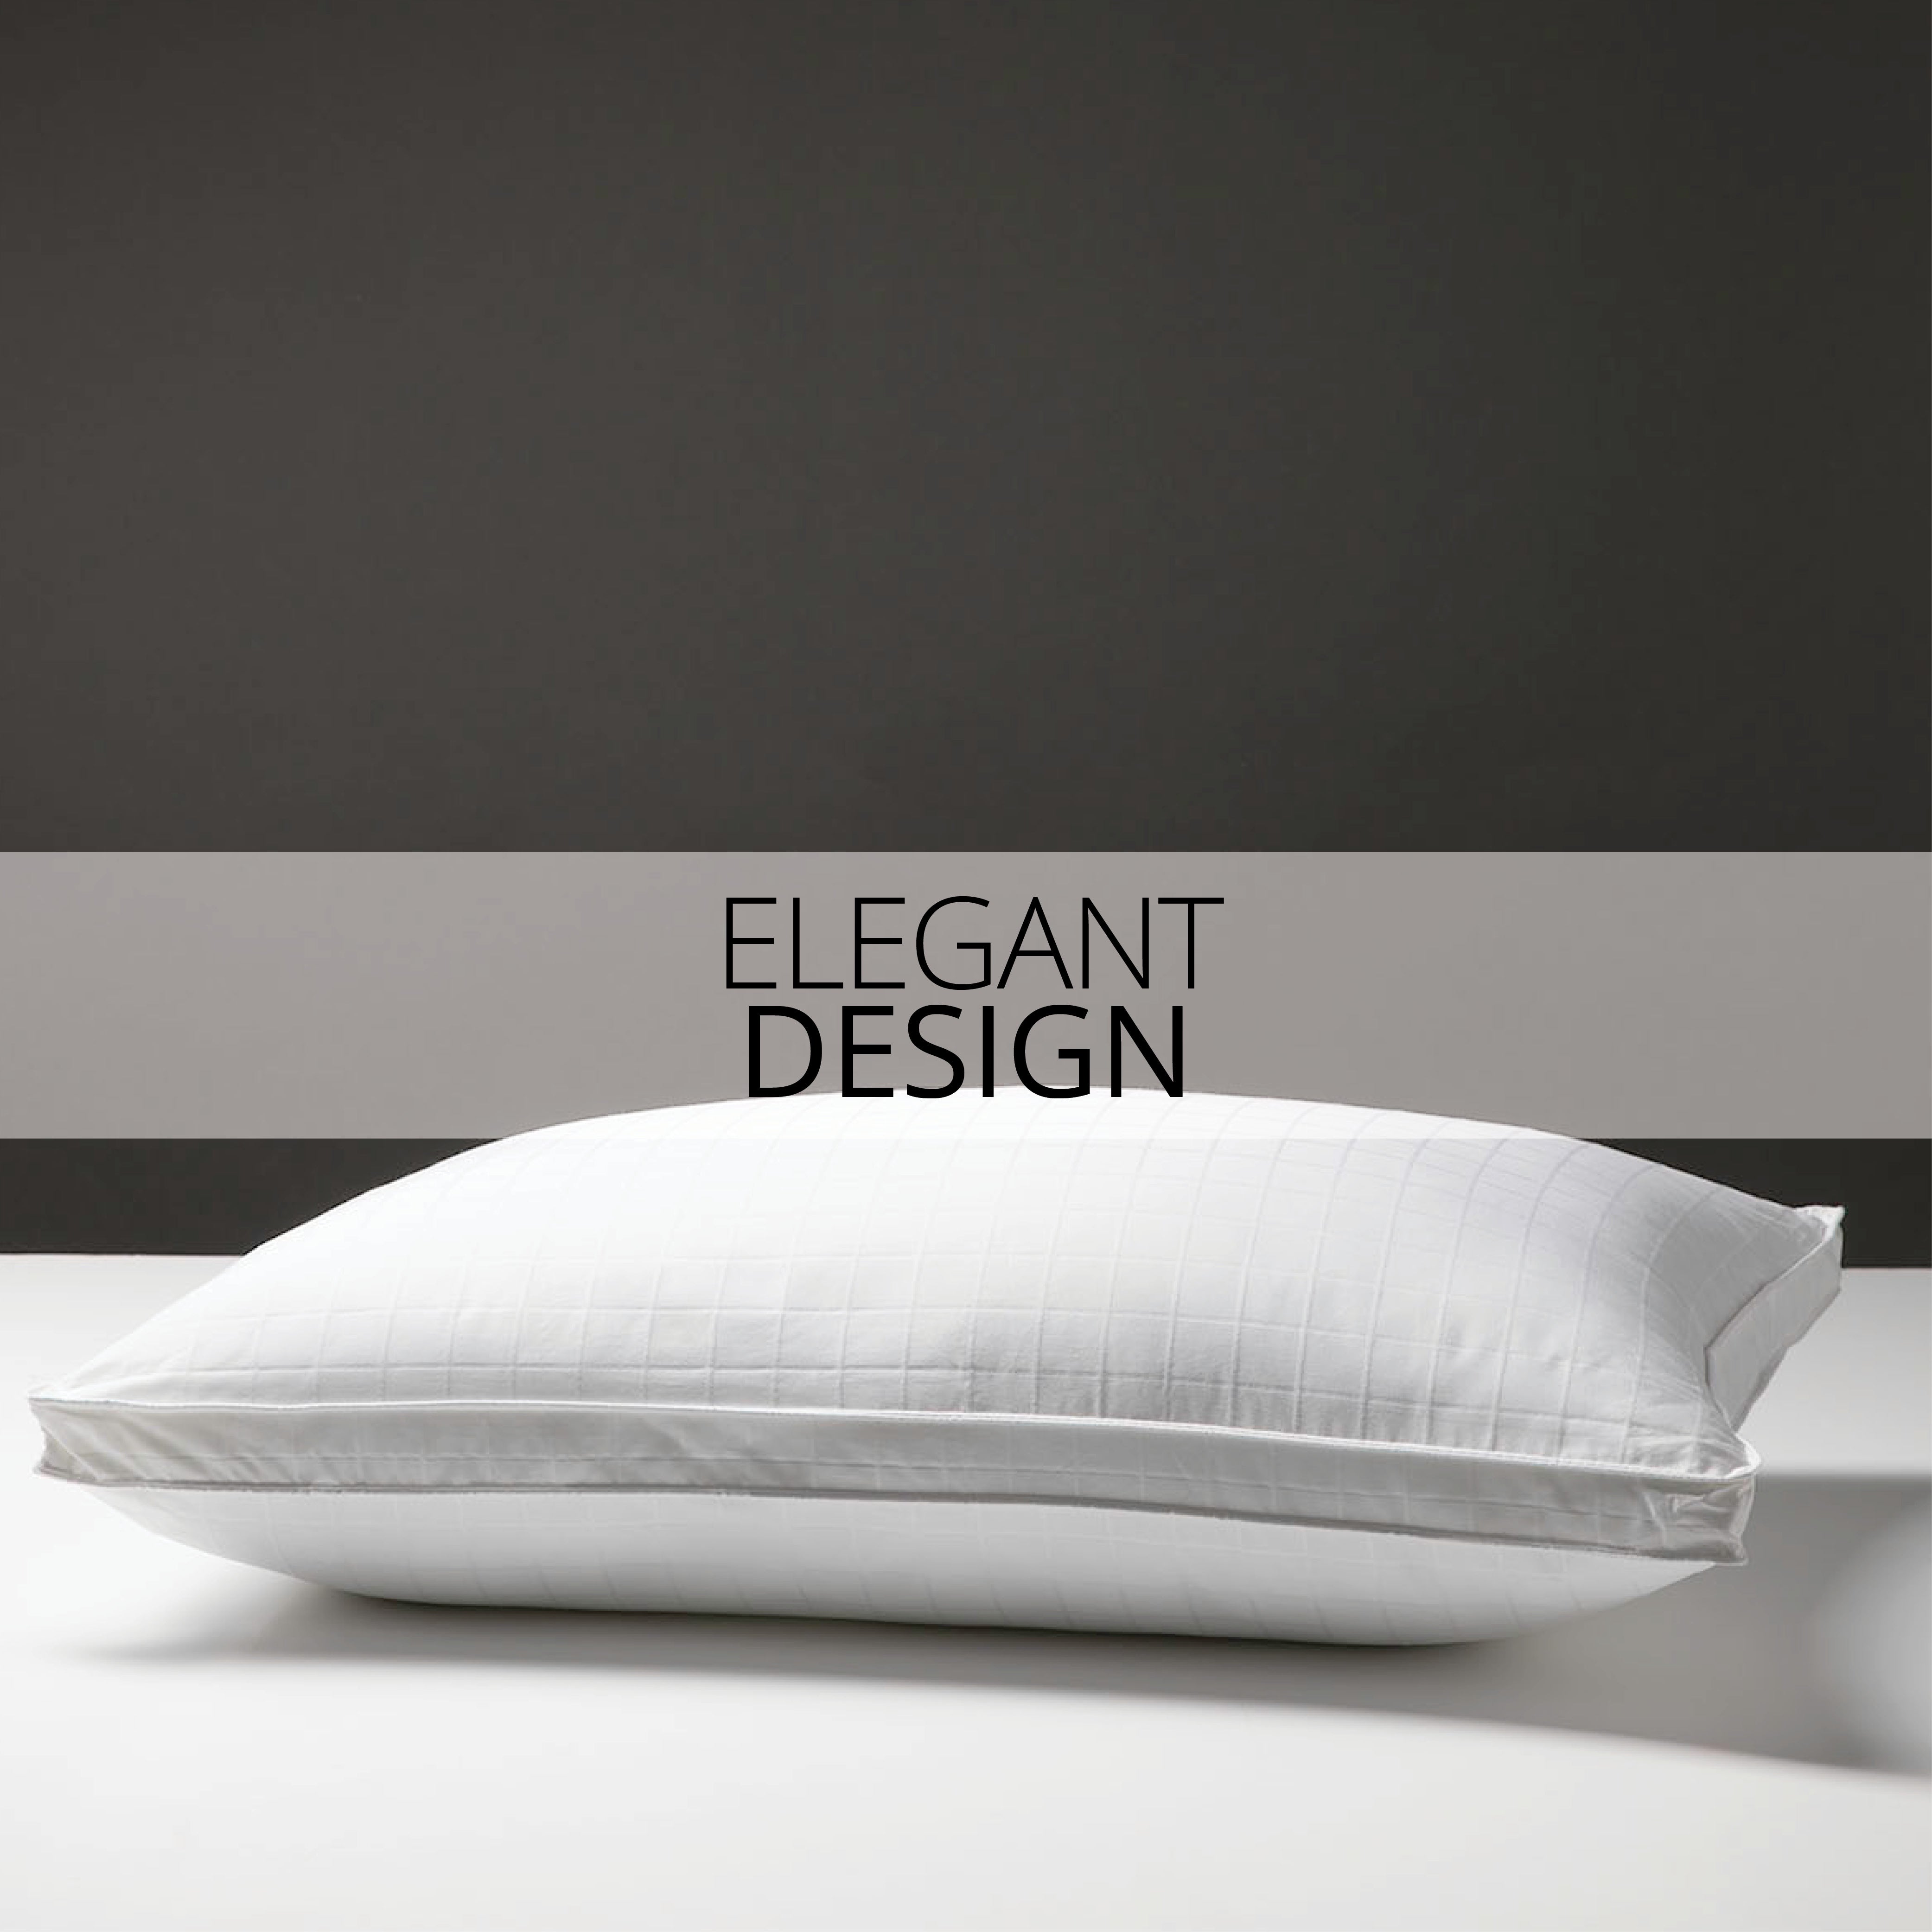 The Naked Experience Feather Pillow — Shoppineapple